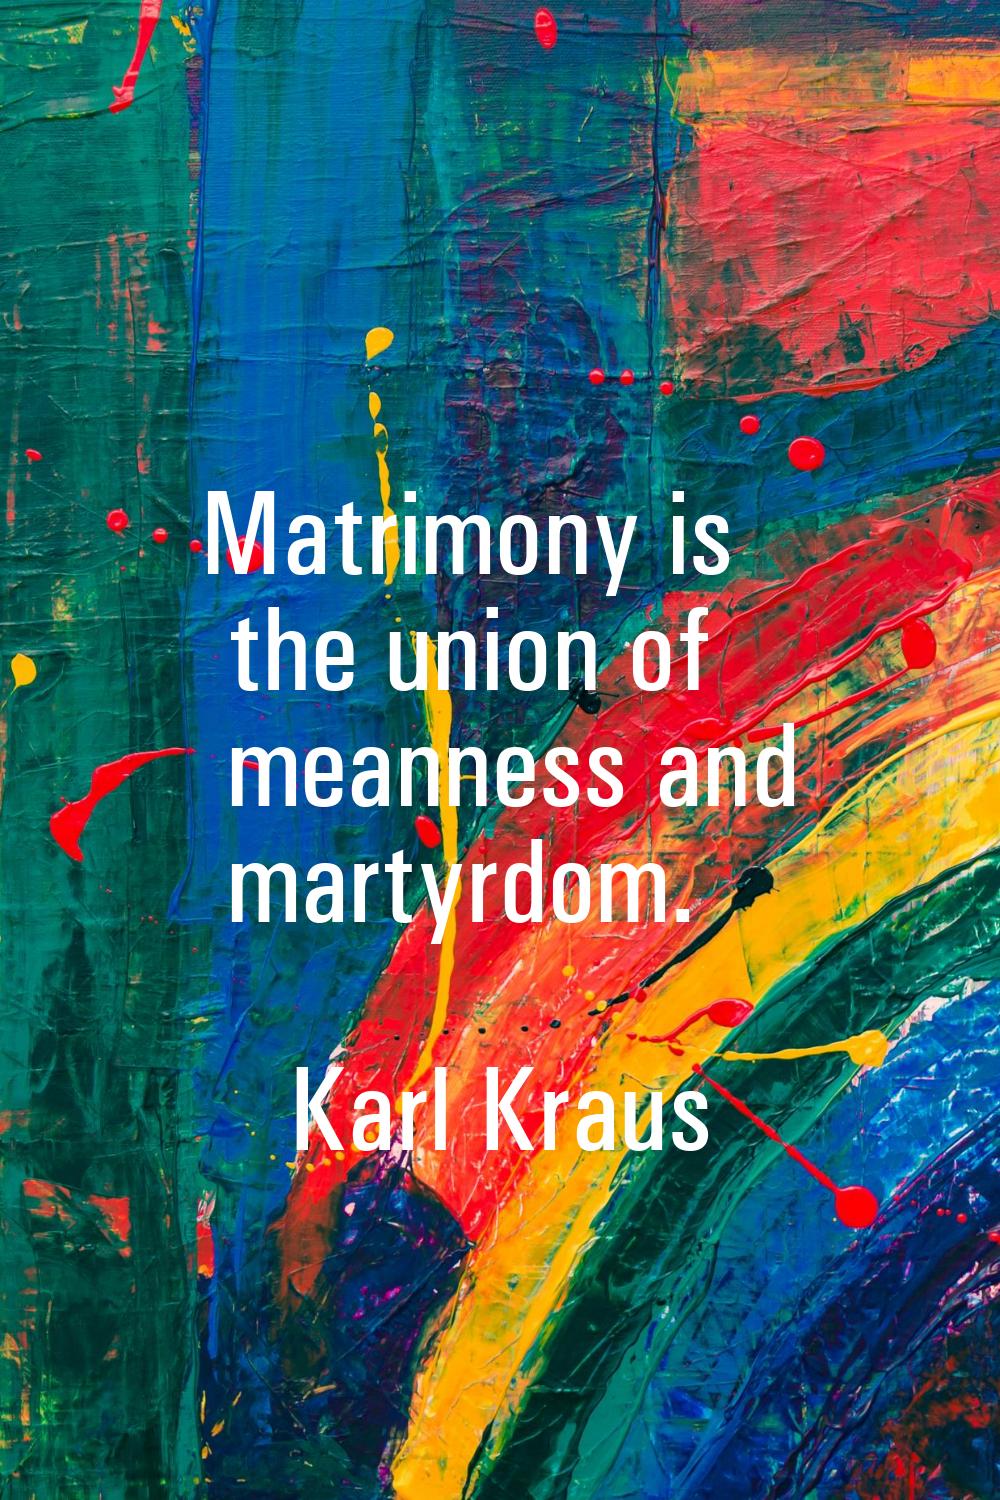 Matrimony is the union of meanness and martyrdom.